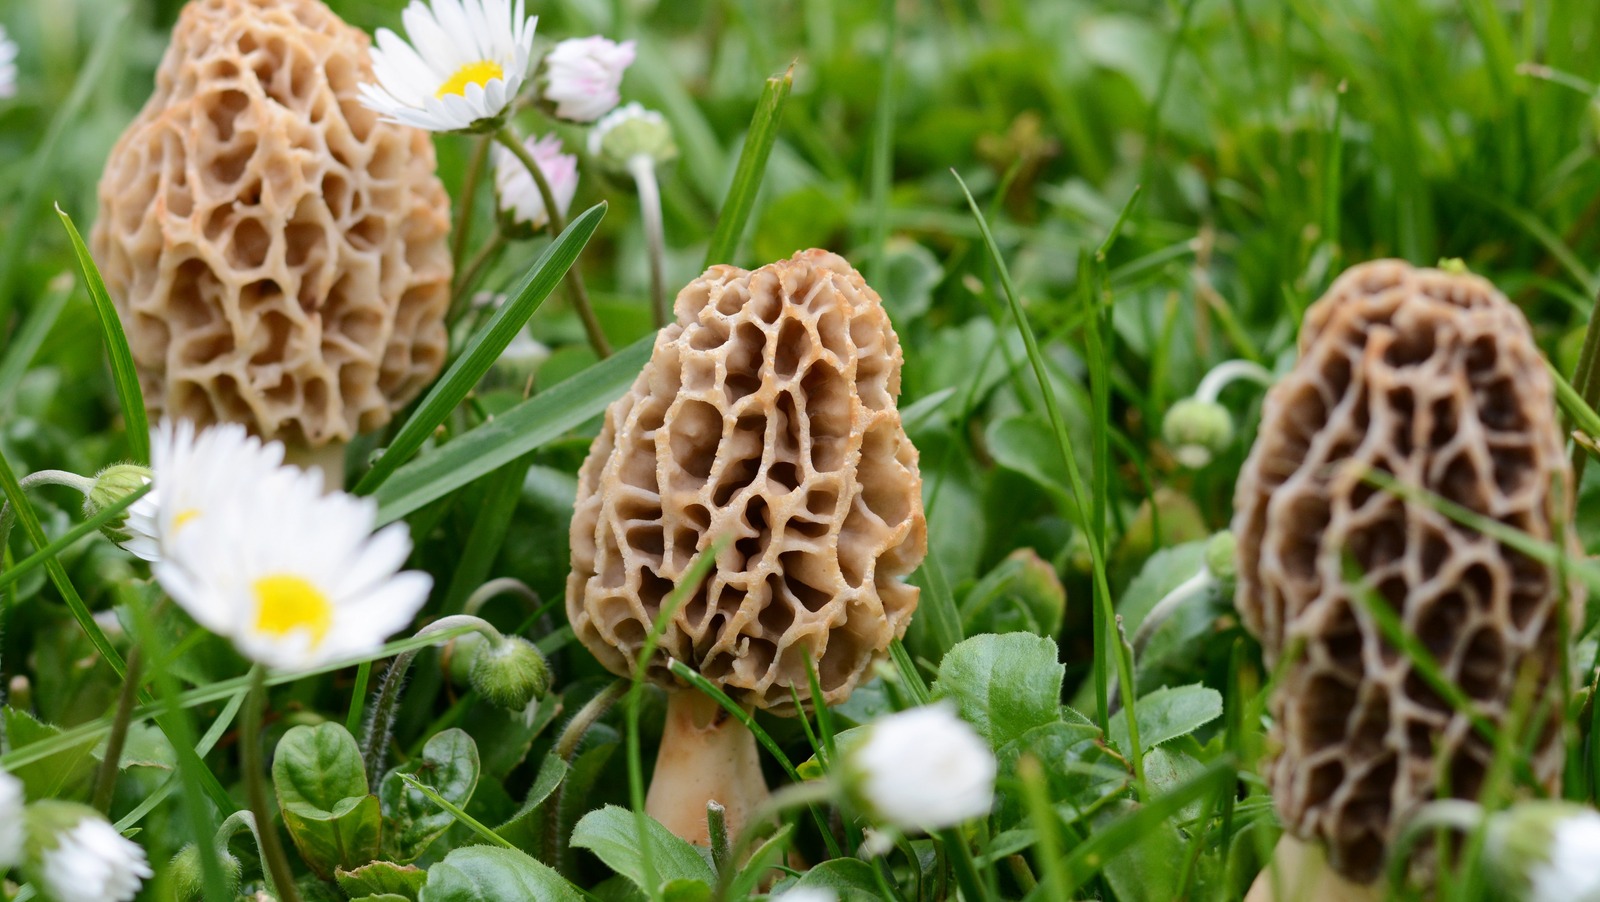 There are several ways to store fresh morels